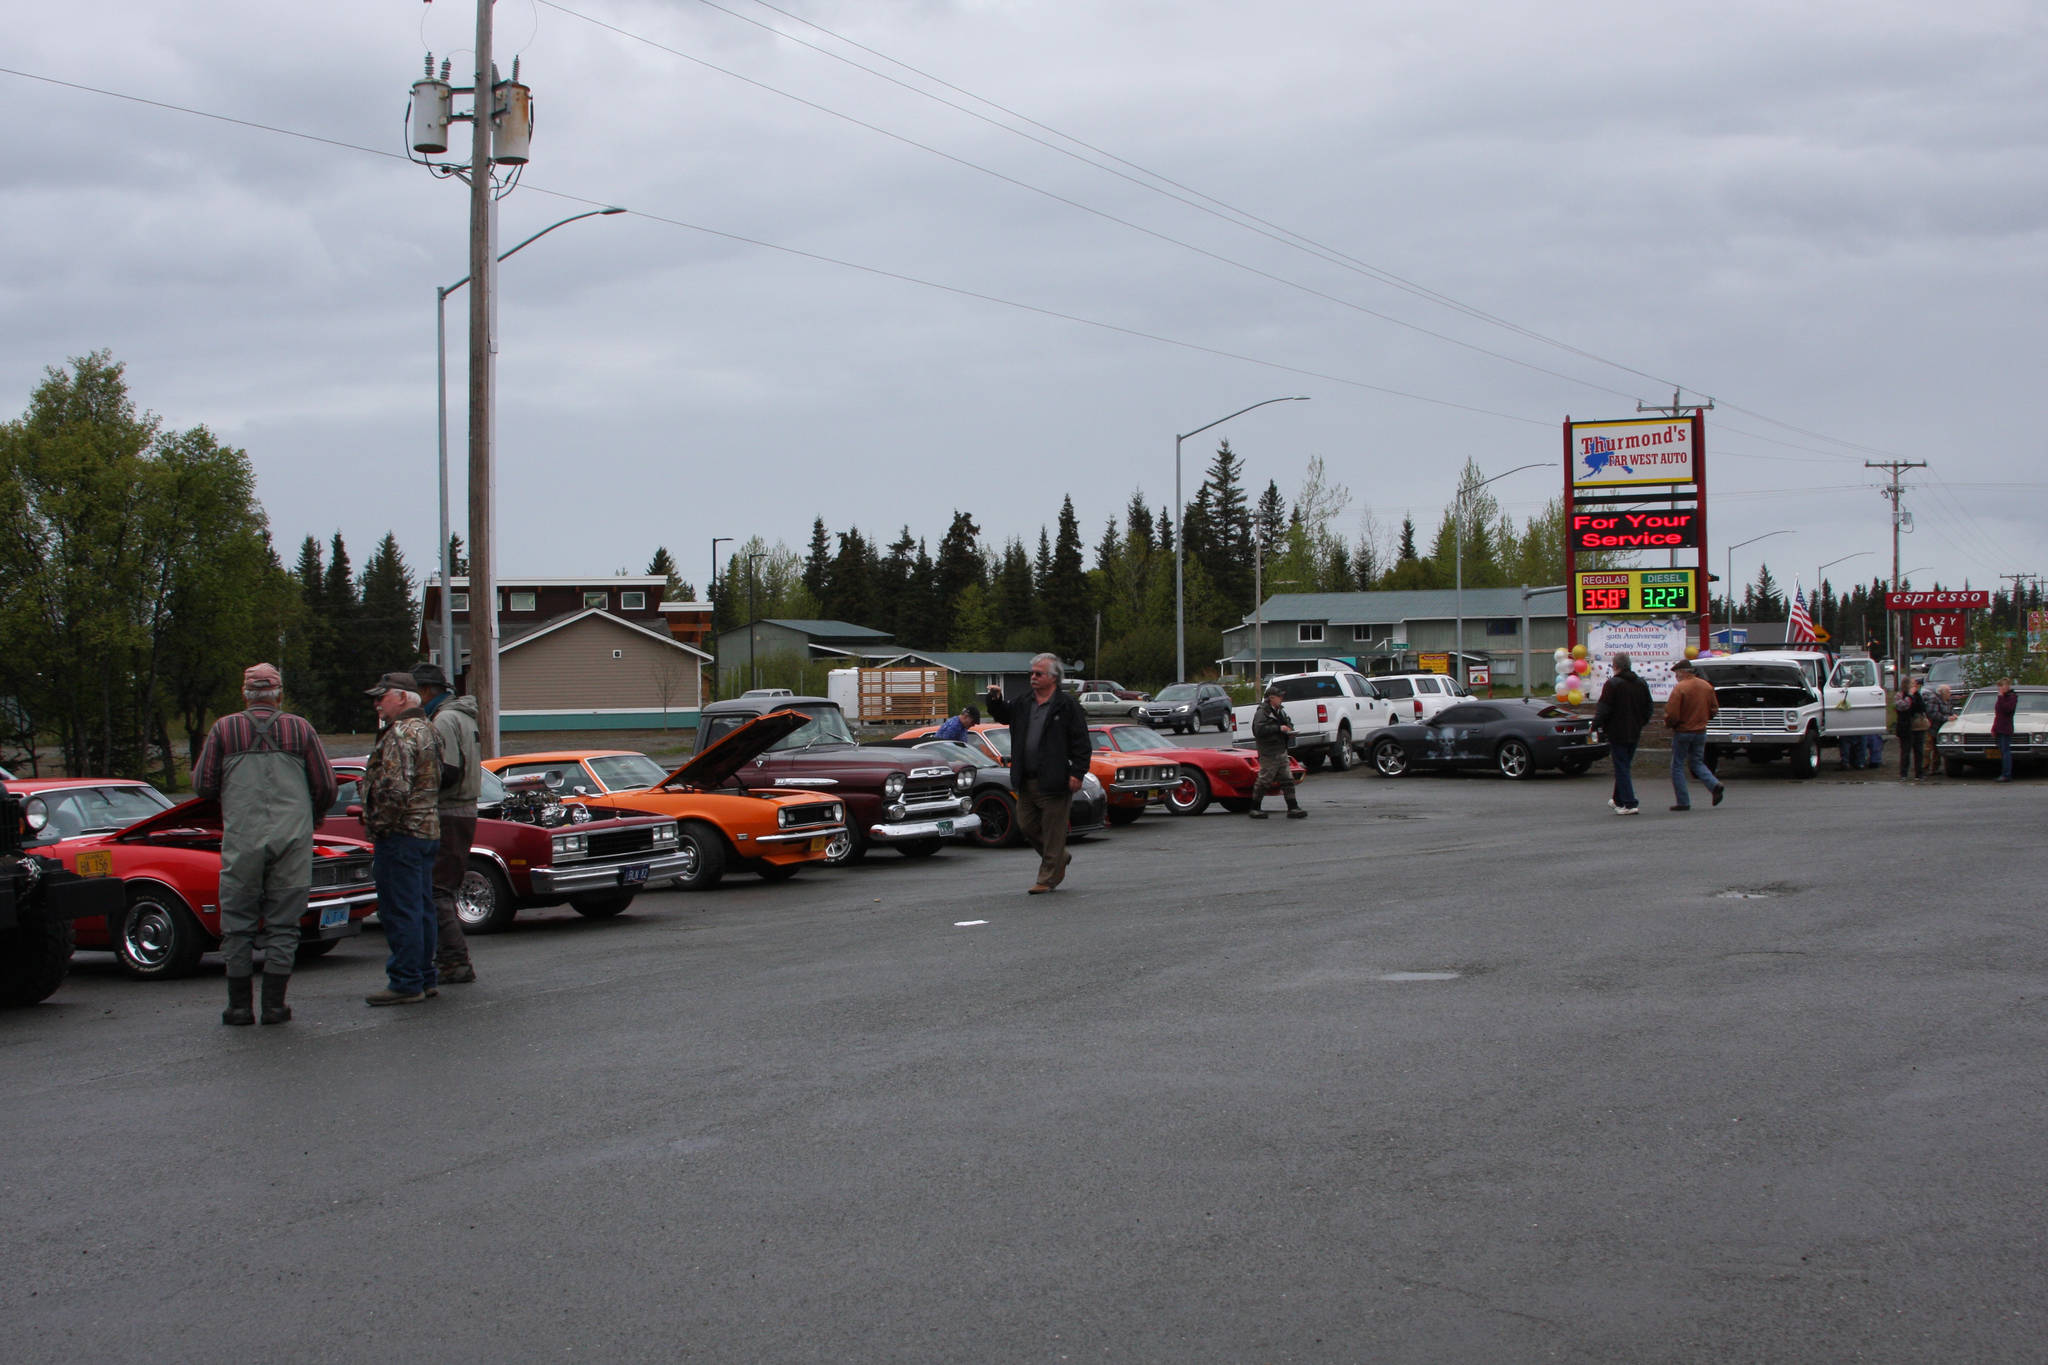 Classic cars brought in by members of the Kaknu Kruzer Car Club of Alaska line up in the parking lot at Thurmond’s Far West Auto in Anchor Point, Alaska, on Saturday, May 25. (Photo by Delcenia Cosman)